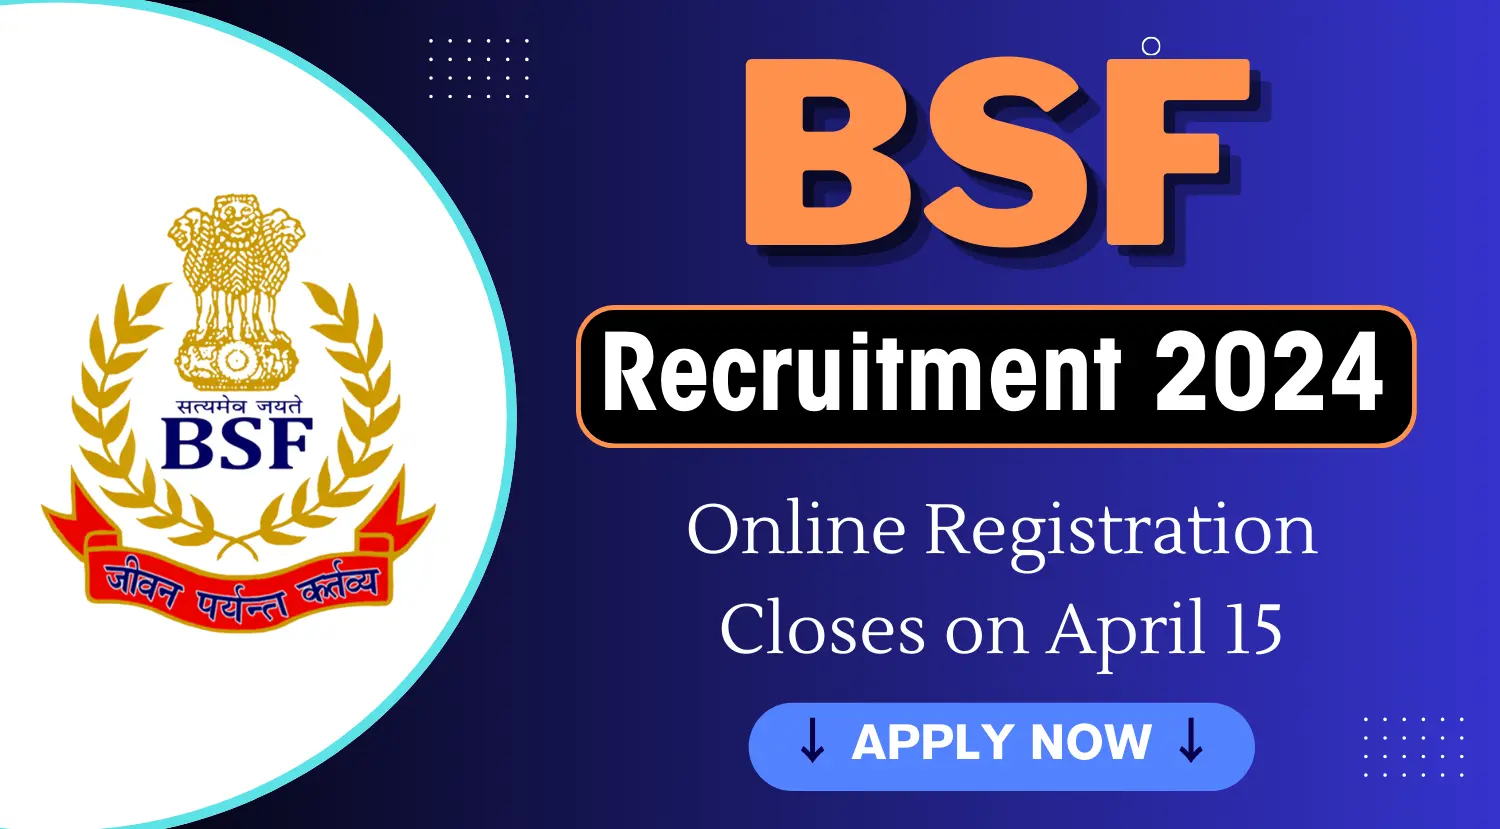 BSF 82 Group B C Vacancy 2024 Online Registration Closes on April 15